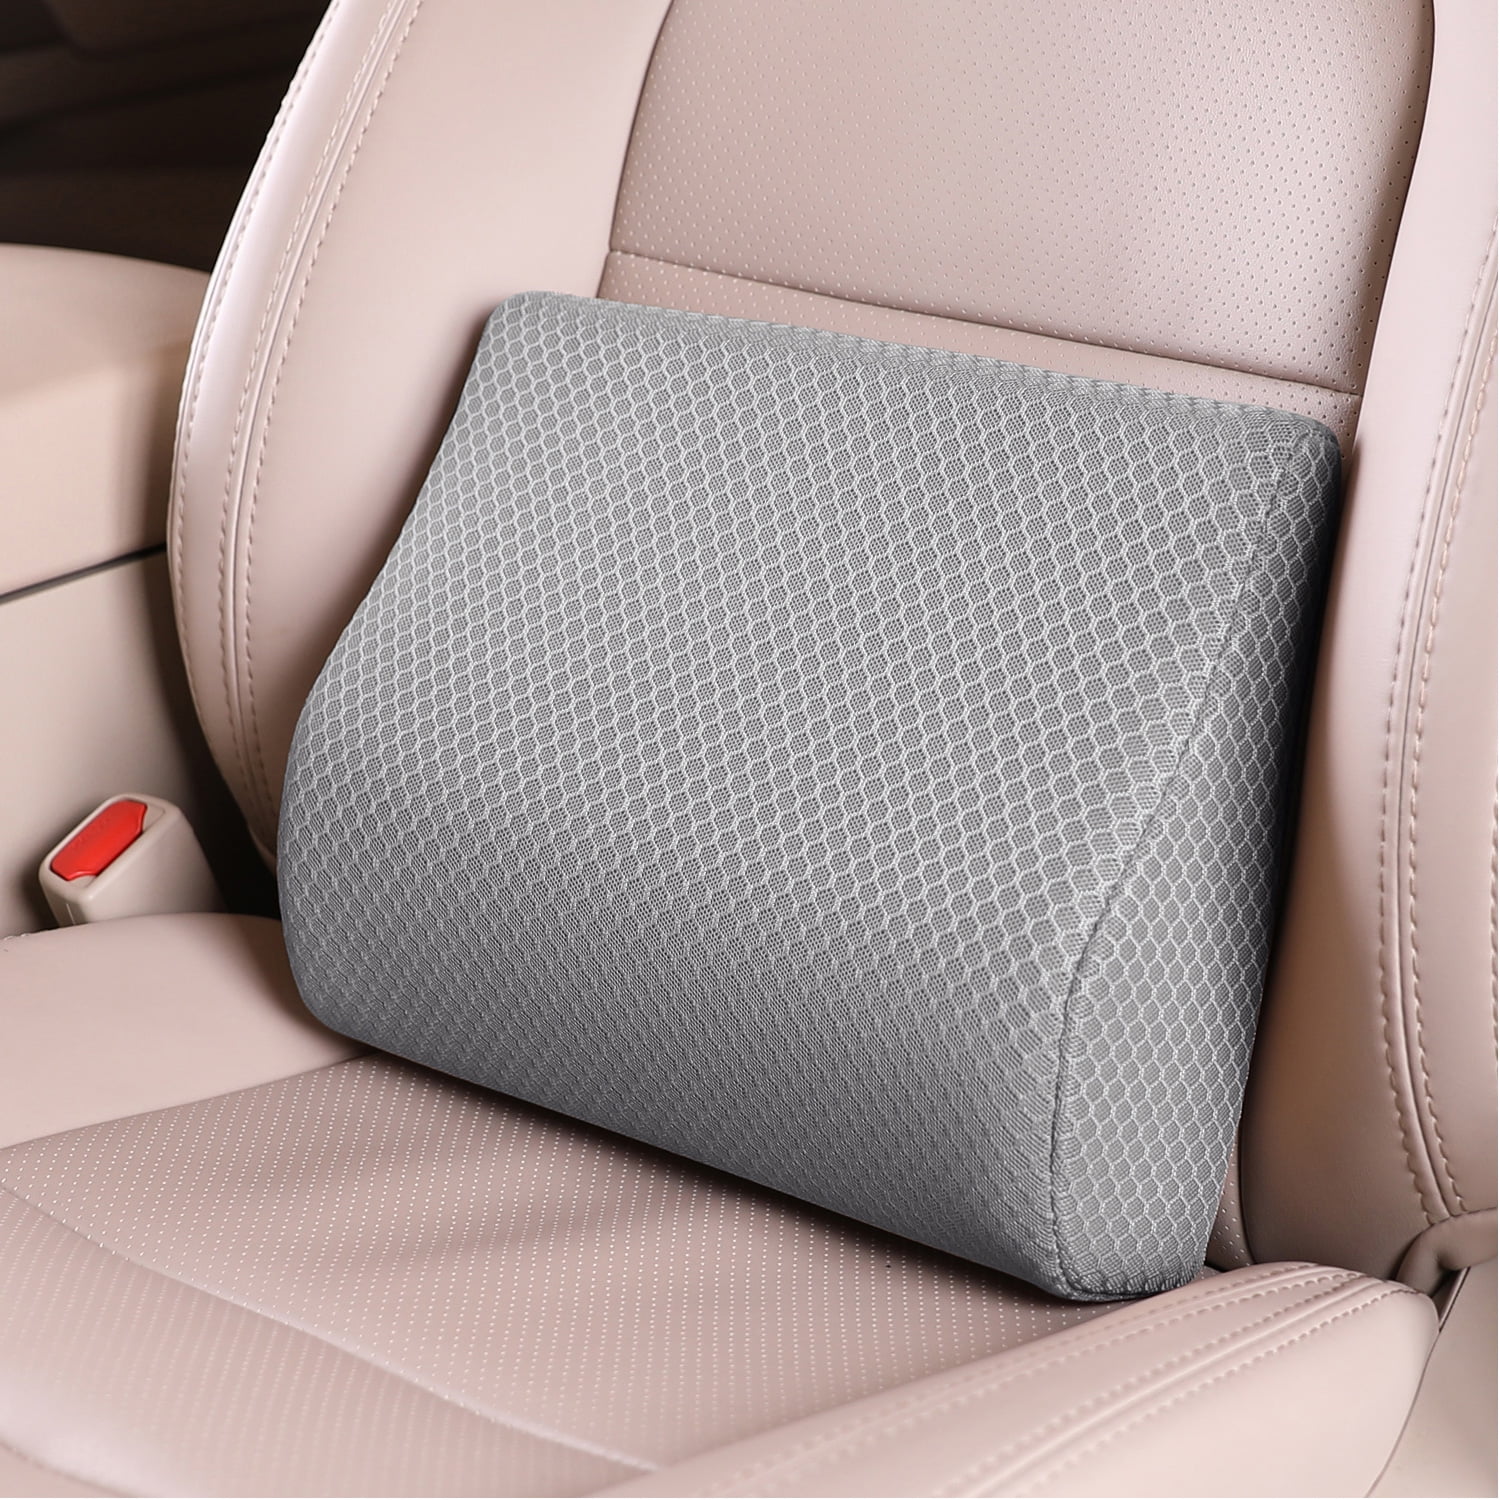 Lacyie Car Booster Seat Cushion Portable Car Seat Pad for Office